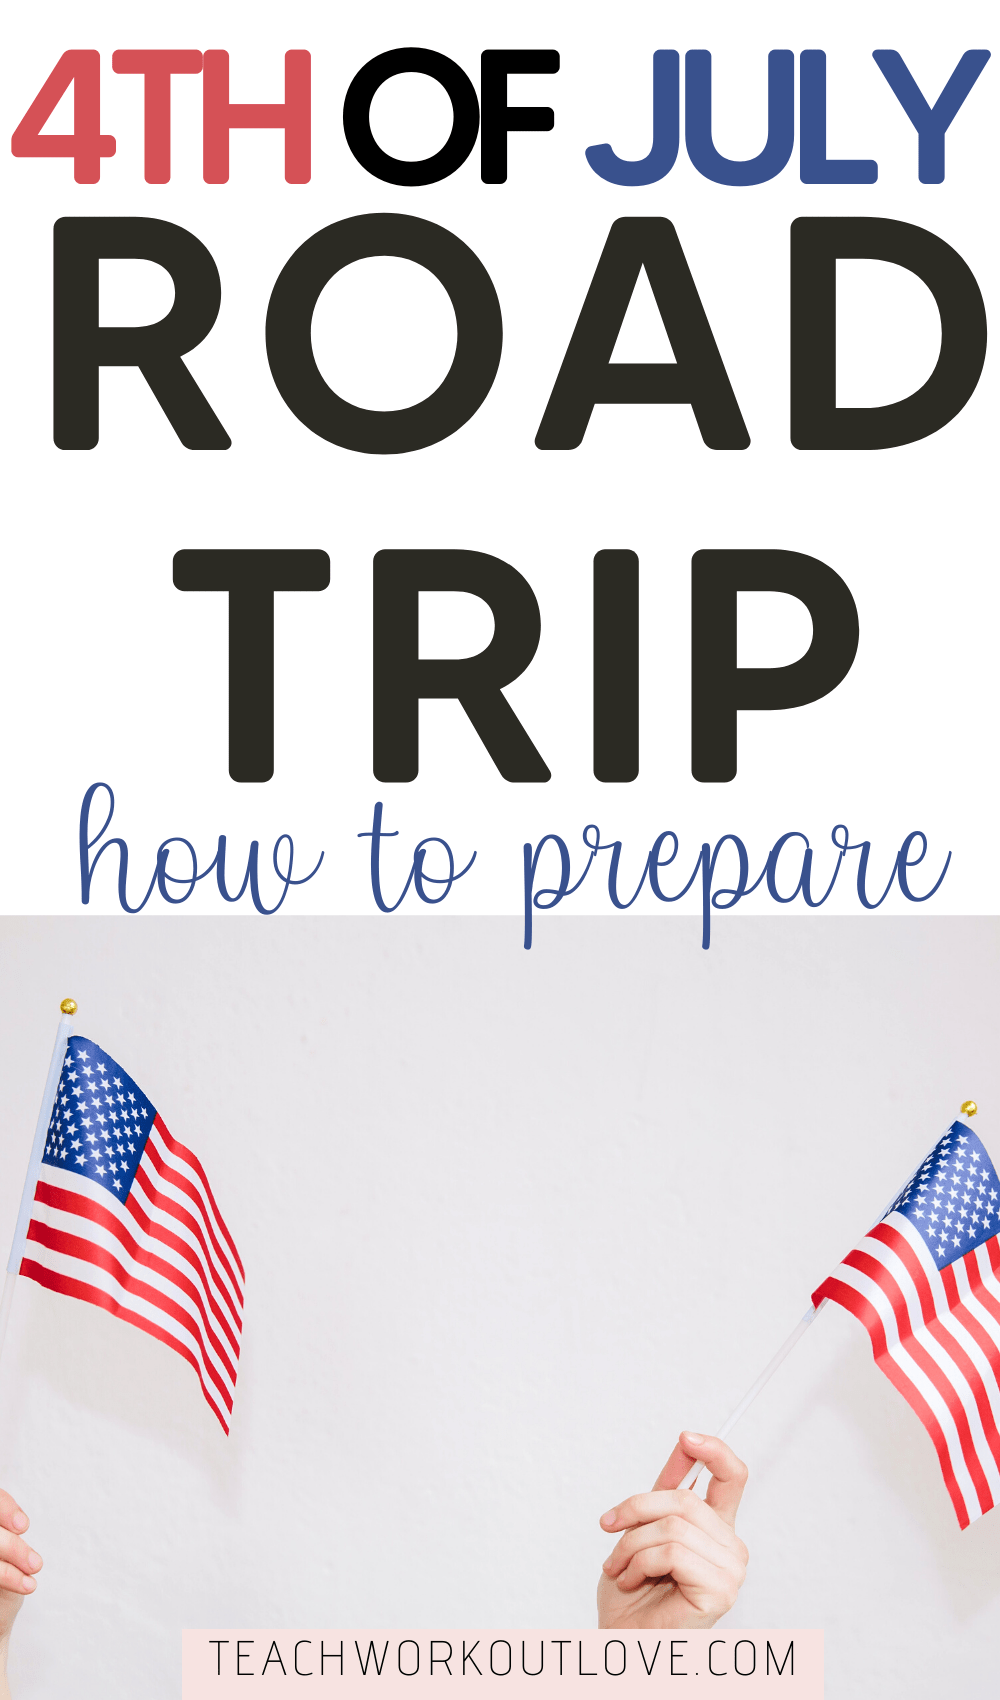 Every American wants to explore the country. Here are a few reminders and tips to get your car ready for your Fourth of July road trip.